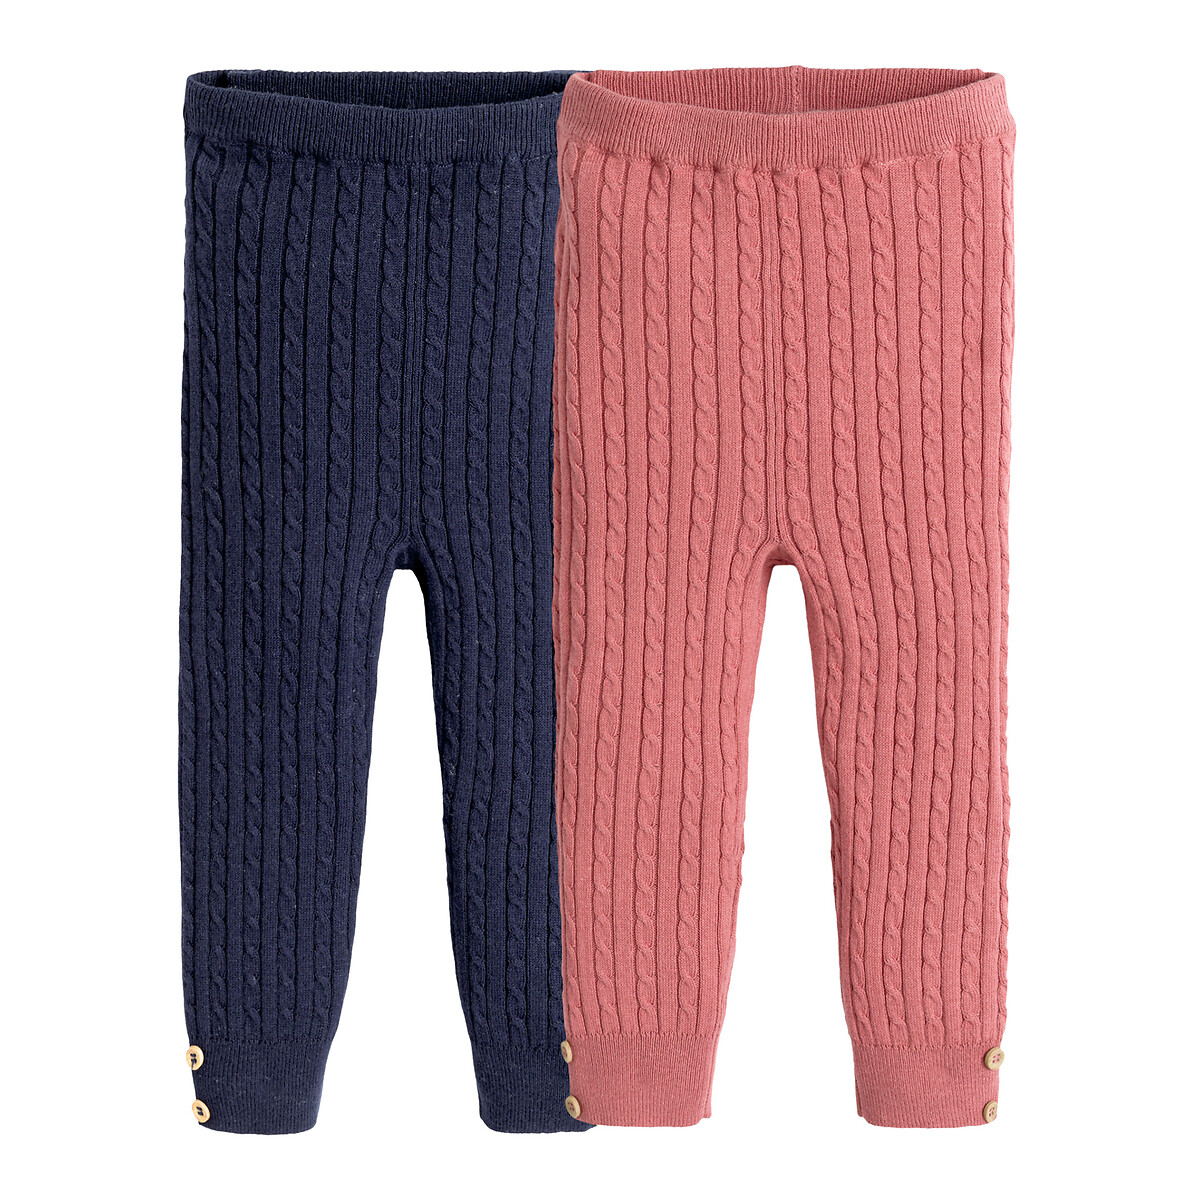 Pack of 2 Leggings in Cable Knit Cotton Mix